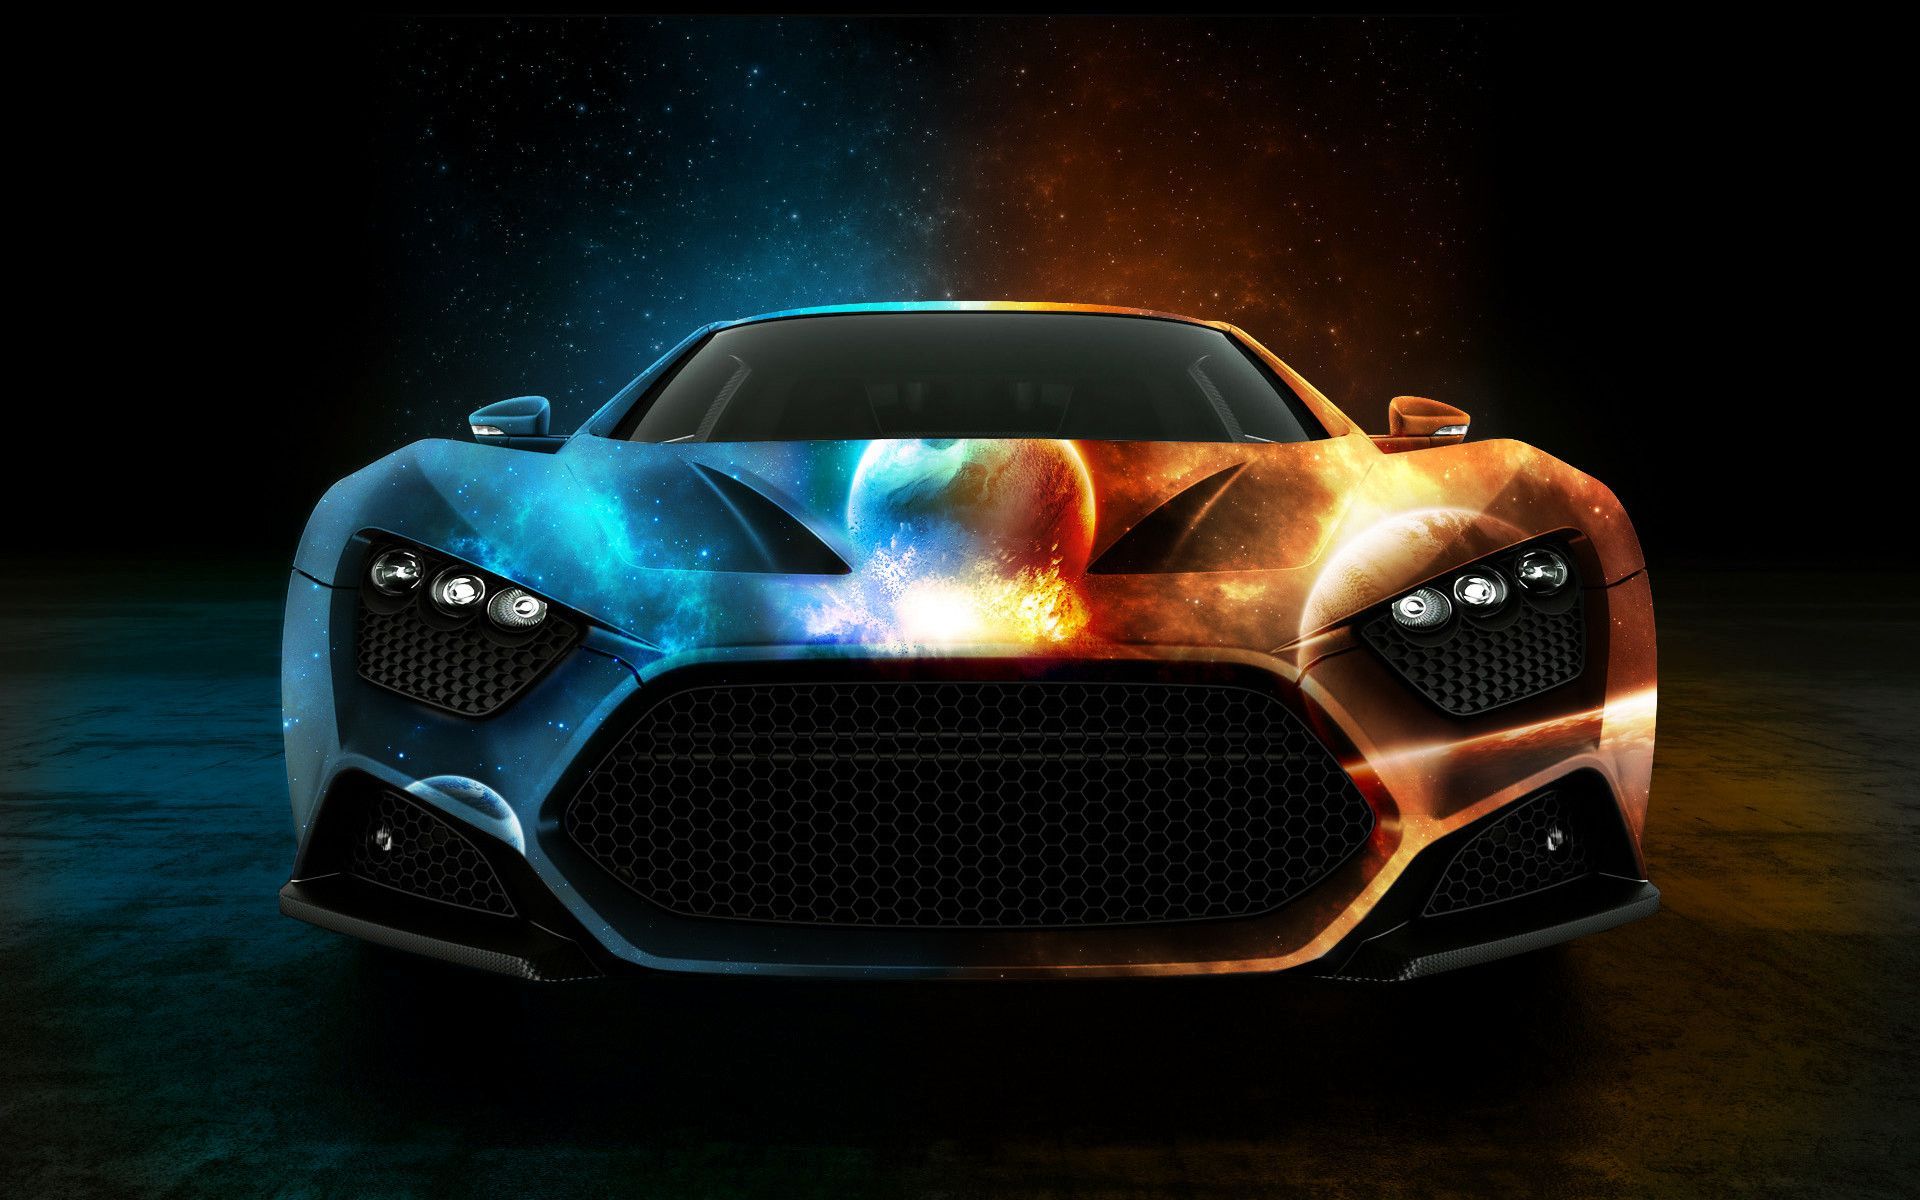 Awesome car wallpapers 9 awesome computer backgrounds Free Photos